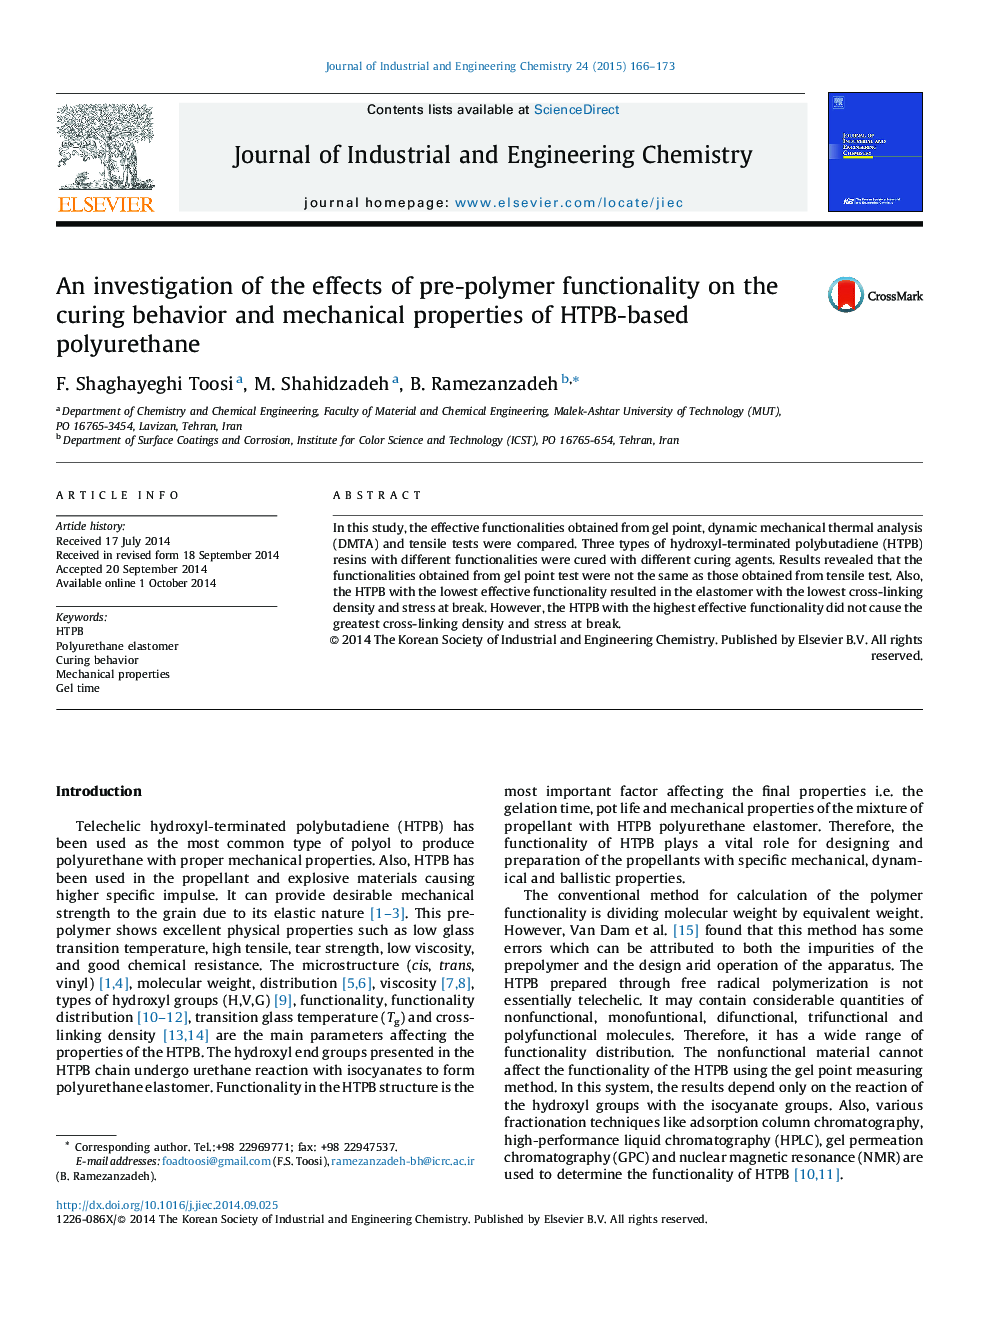 An investigation of the effects of pre-polymer functionality on the curing behavior and mechanical properties of HTPB-based polyurethane